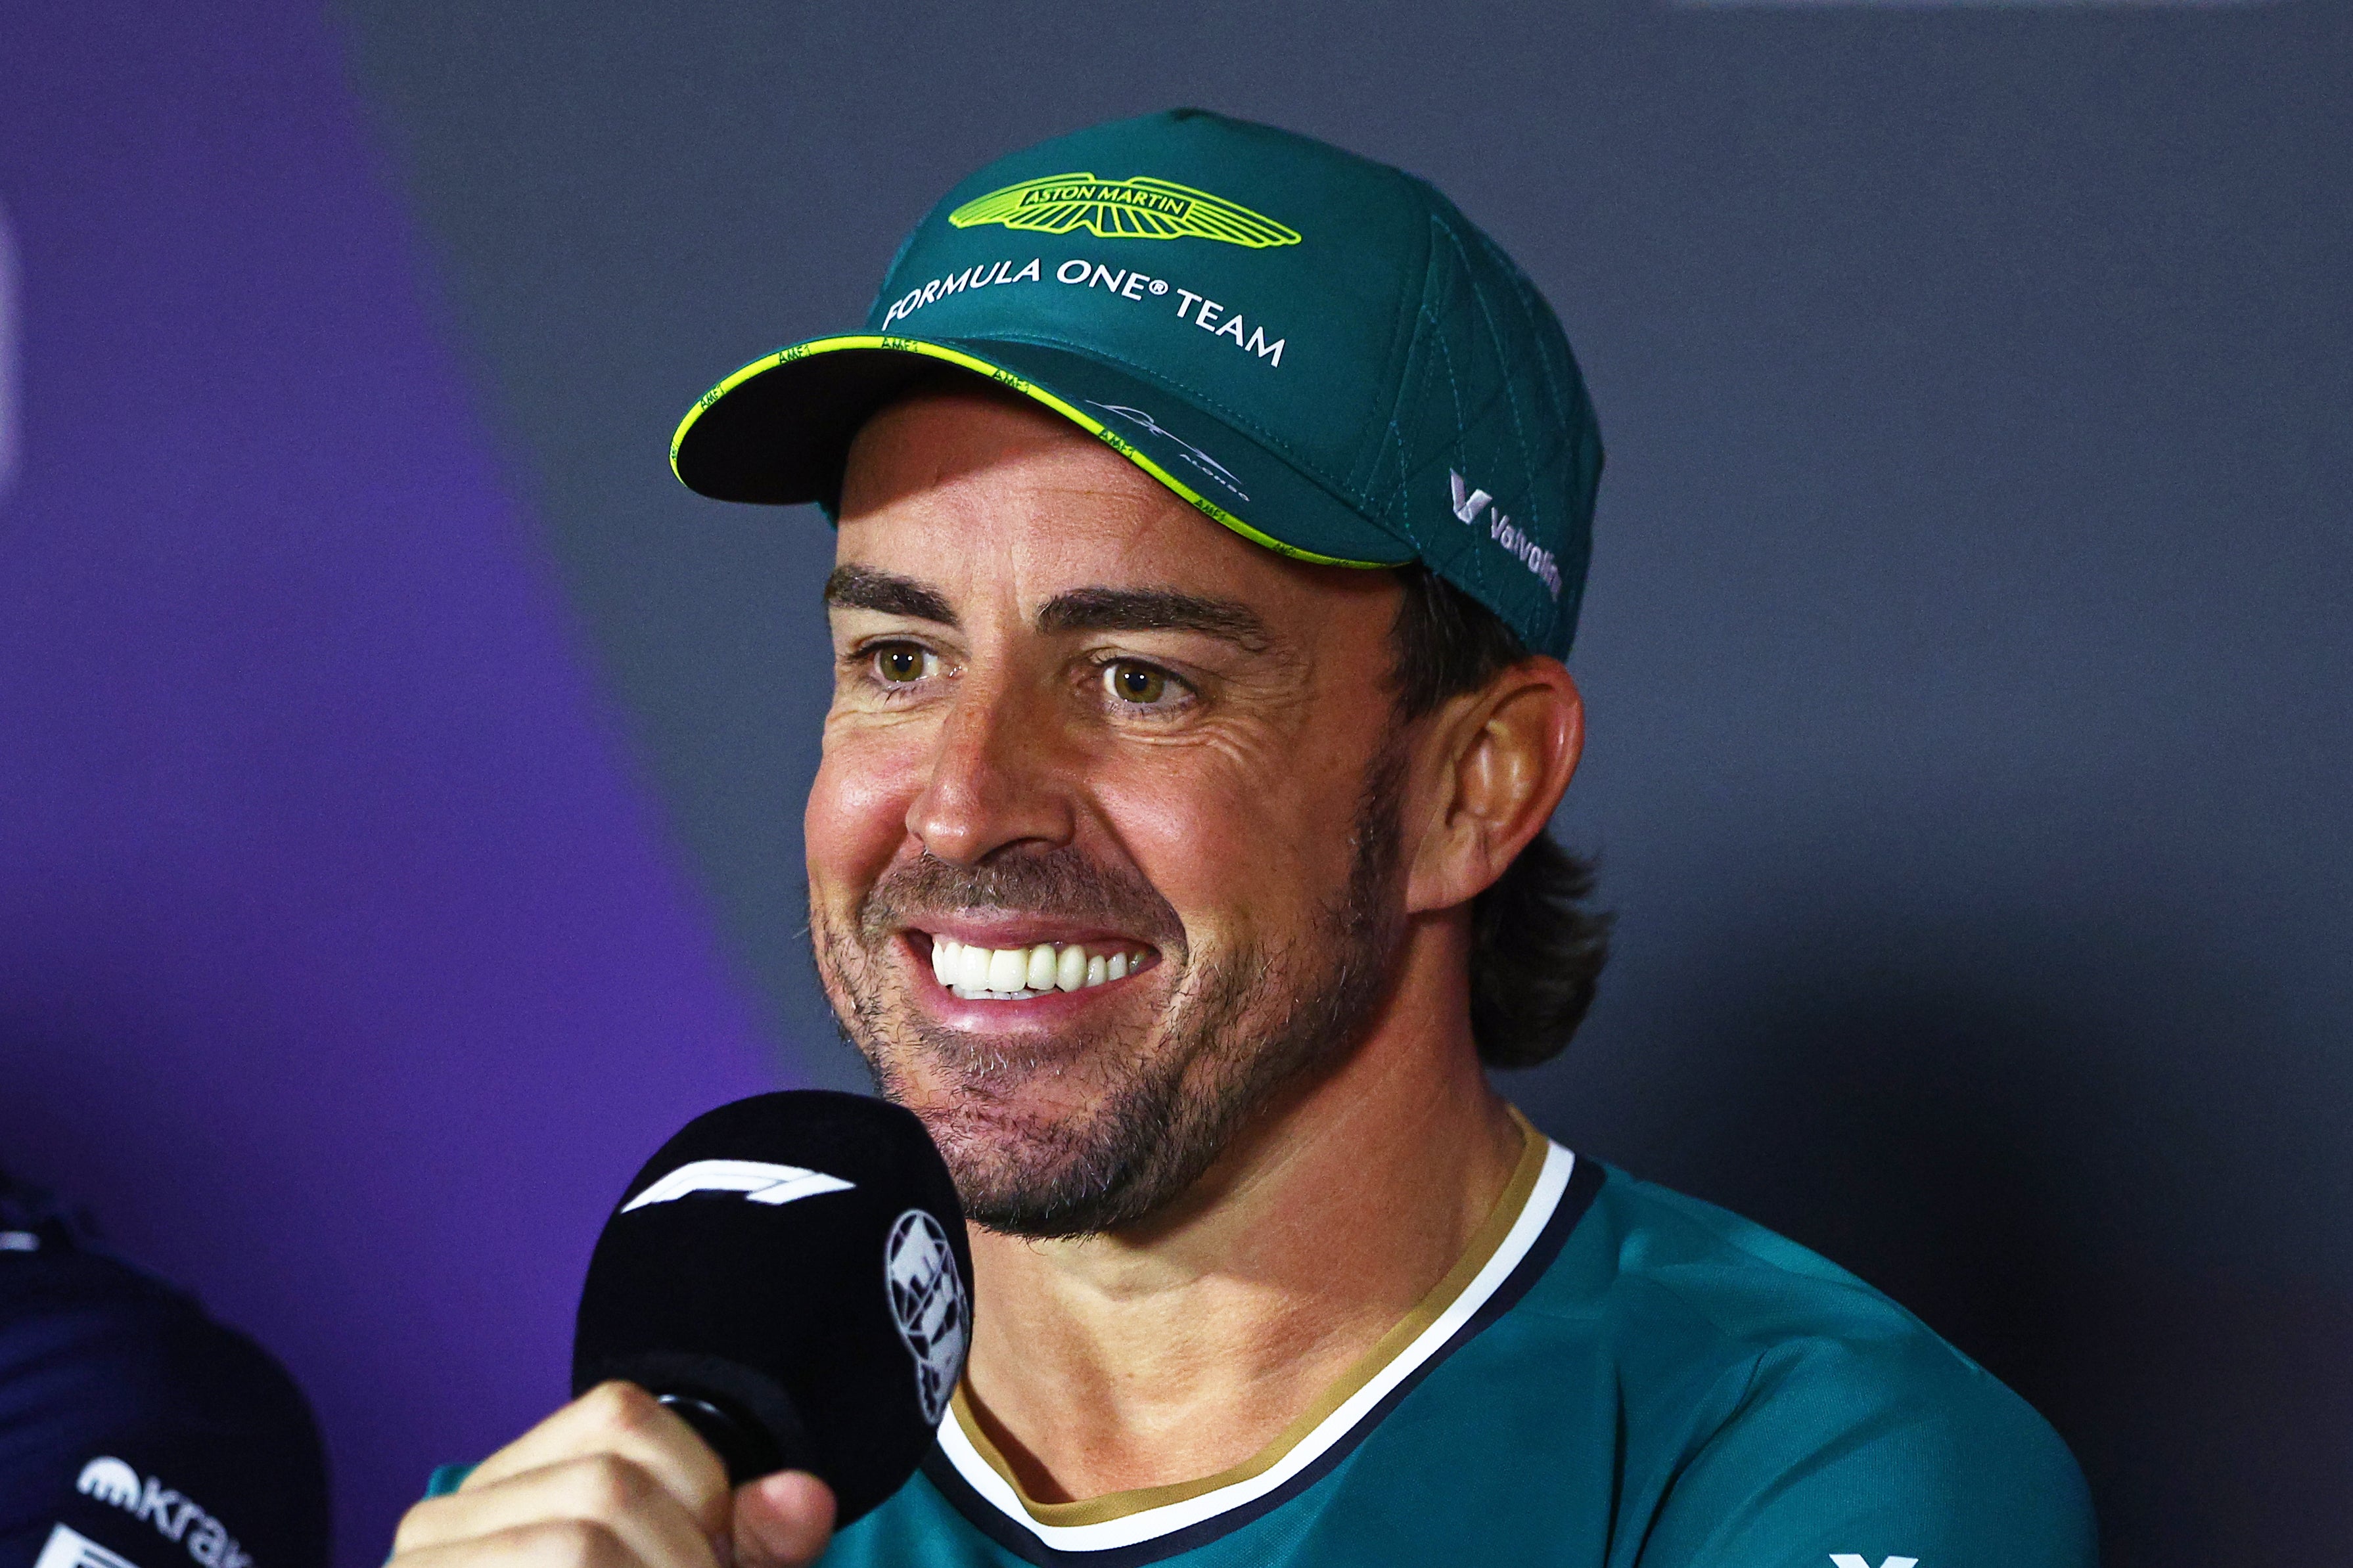 Alonso smiles as he discusses his future in Bahrain